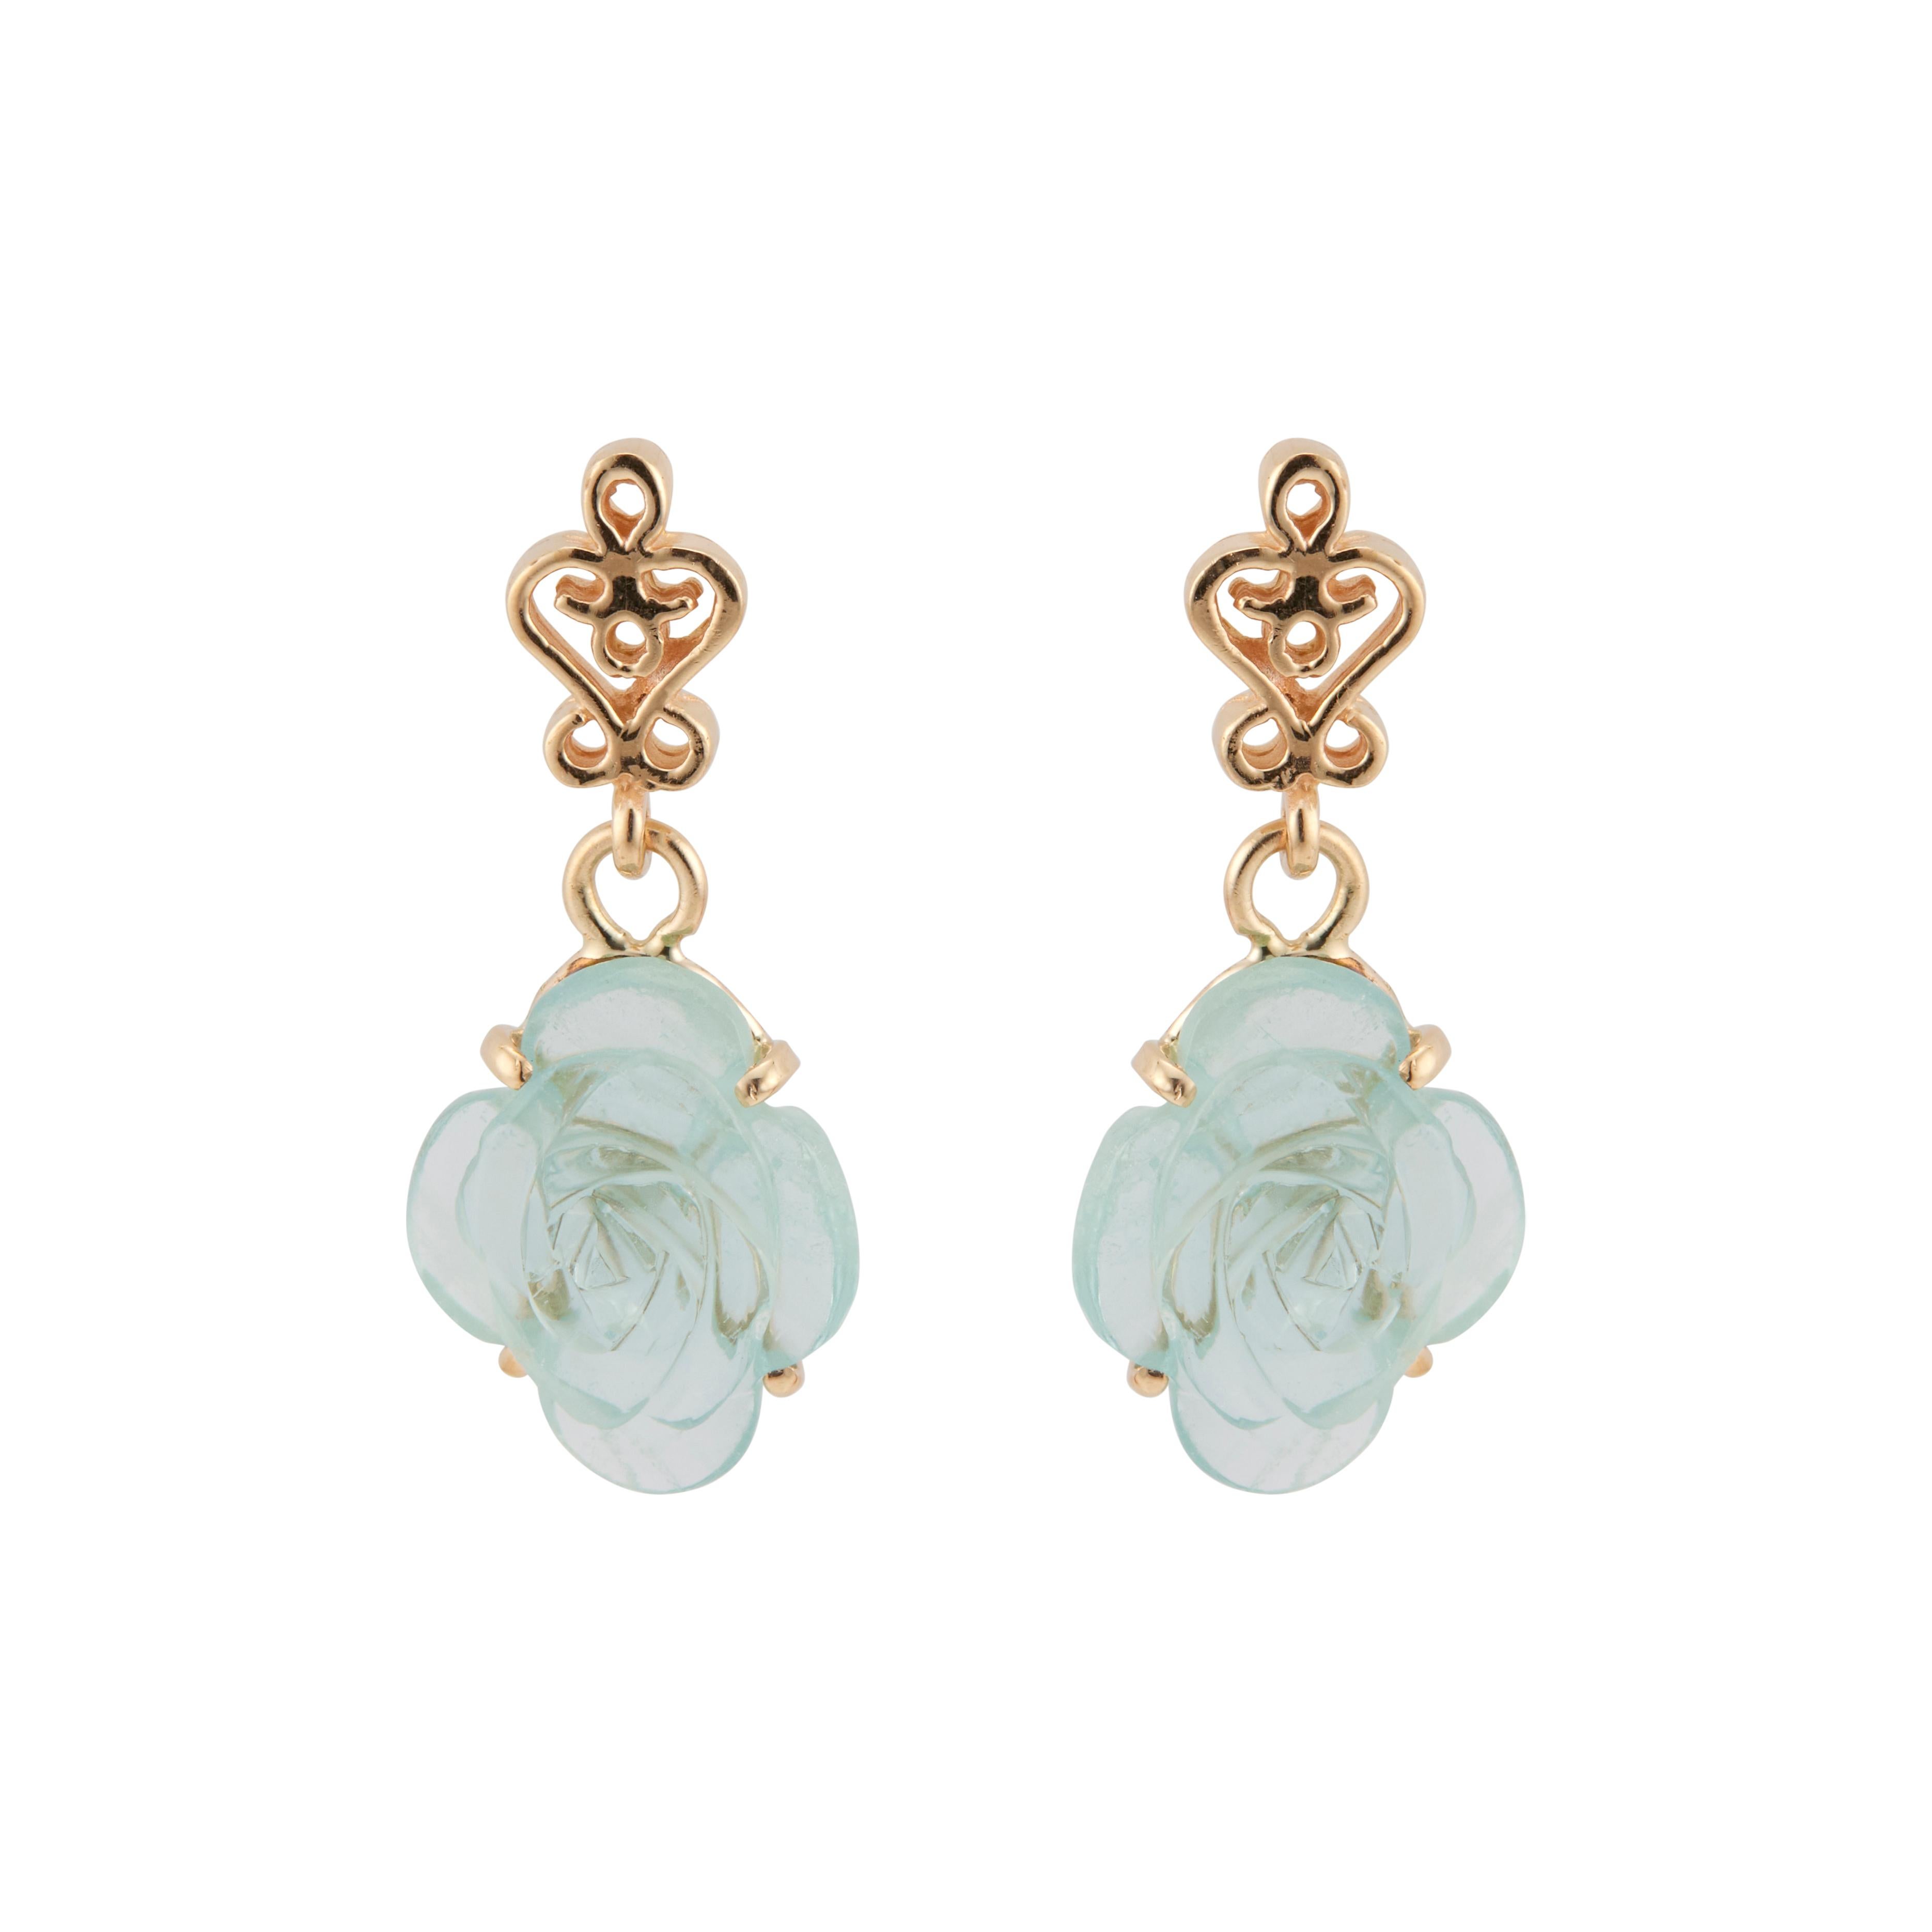 1940's hand carved natural untreated Aqua dangle flower earrings. Bright slightly greenish blue natural color carved flower aquamarines, in 14k yellow gold open work settings.  

2 fancy greenish blue natural untreated Aquamarine, approx. total